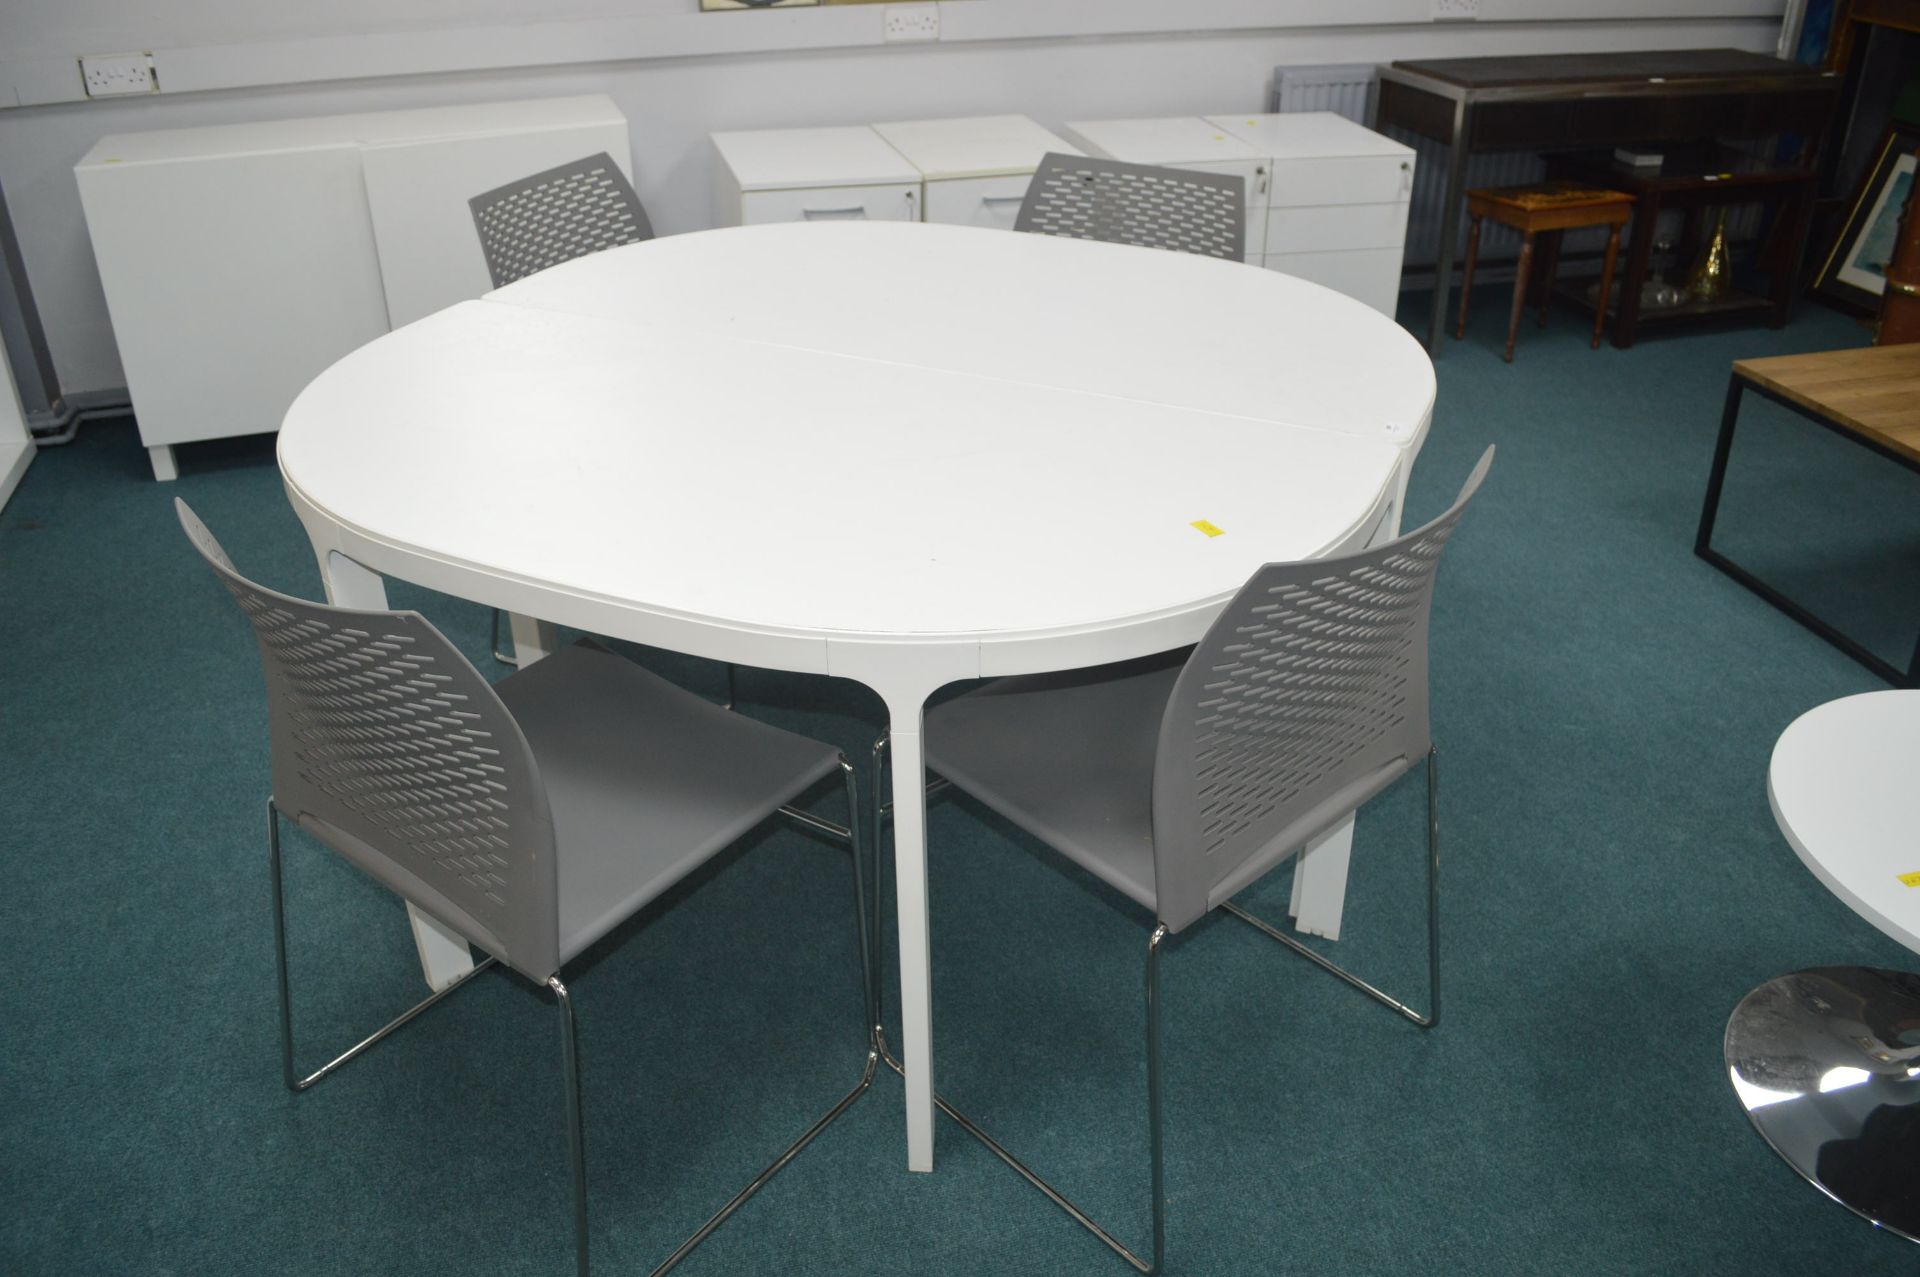 *White Circular Table and Four Grey Chairs